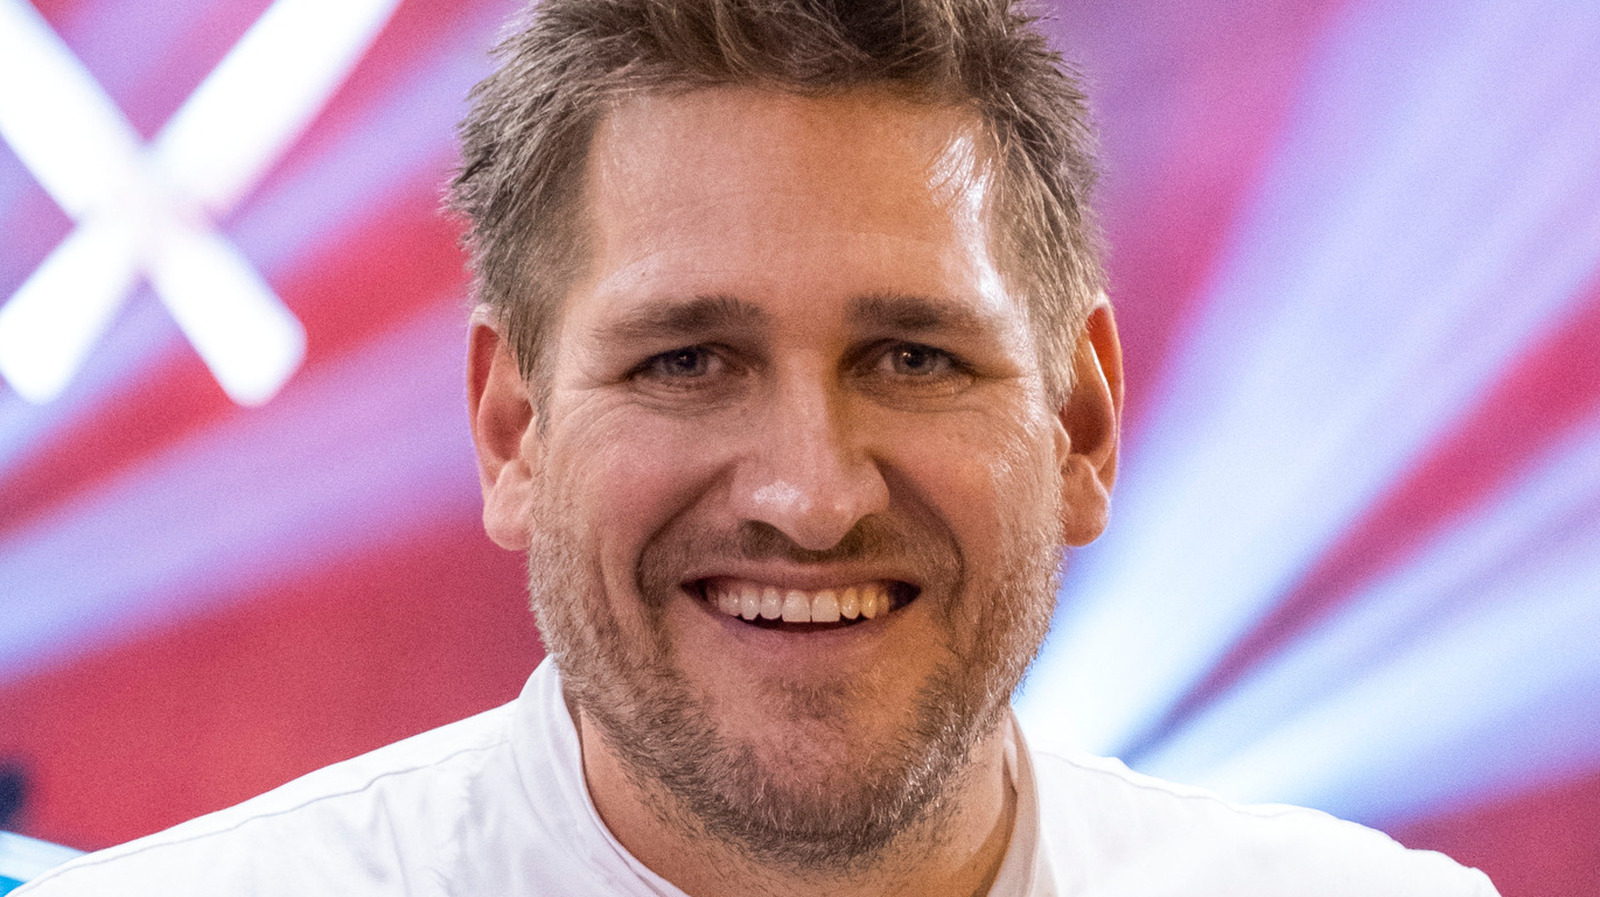 https://www.mashed.com/img/gallery/chef-curtis-stone-dishes-on-the-iron-chef-reboot-and-the-pressure-of-competition-exclusive-interview/l-intro-1655314064.jpg